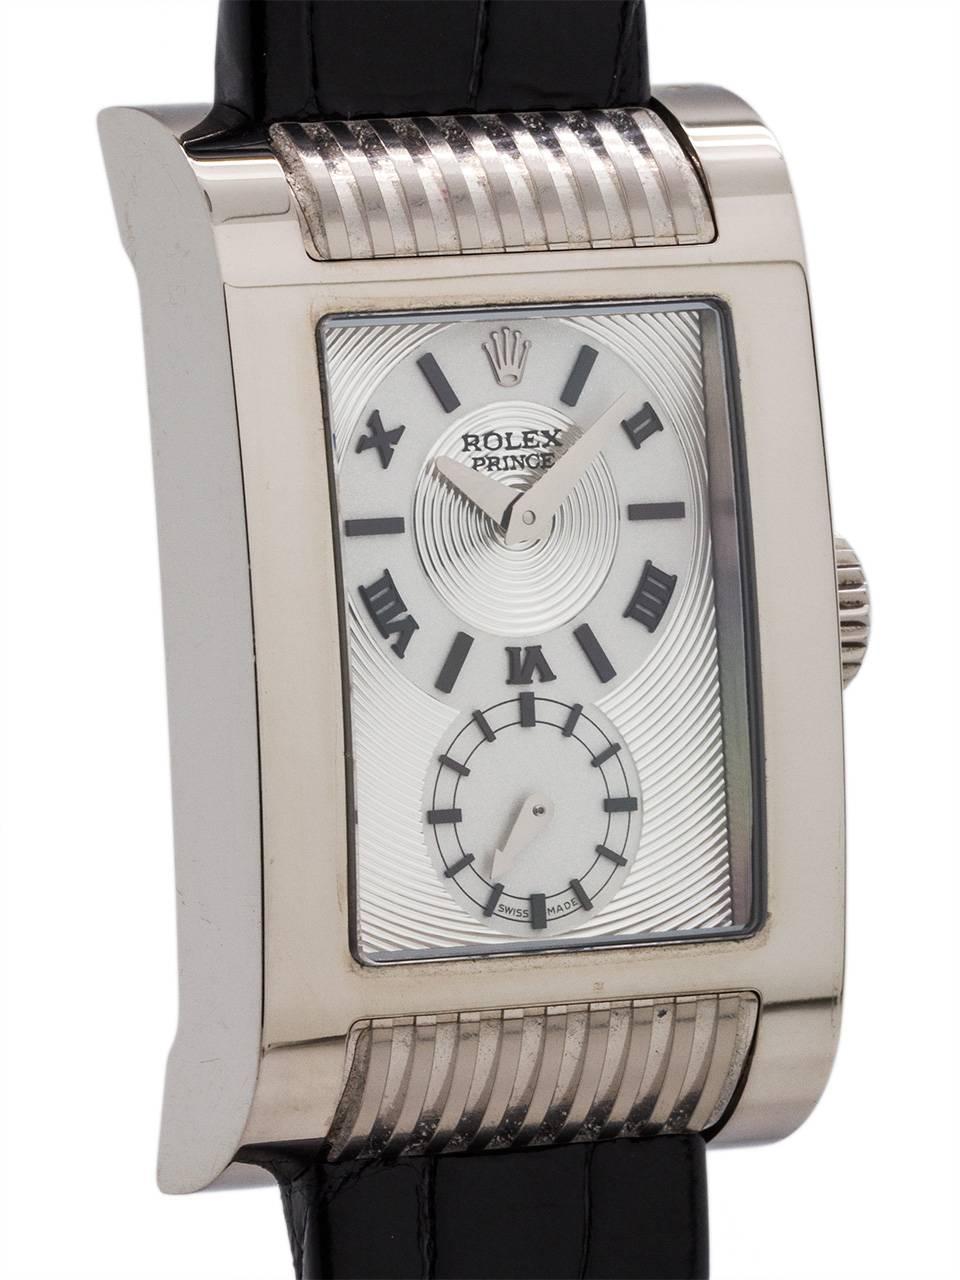 Rolex White Gold Cellini Prince Manual Wind Wristwatch Ref 5441/9, circa 2010 In Excellent Condition For Sale In West Hollywood, CA